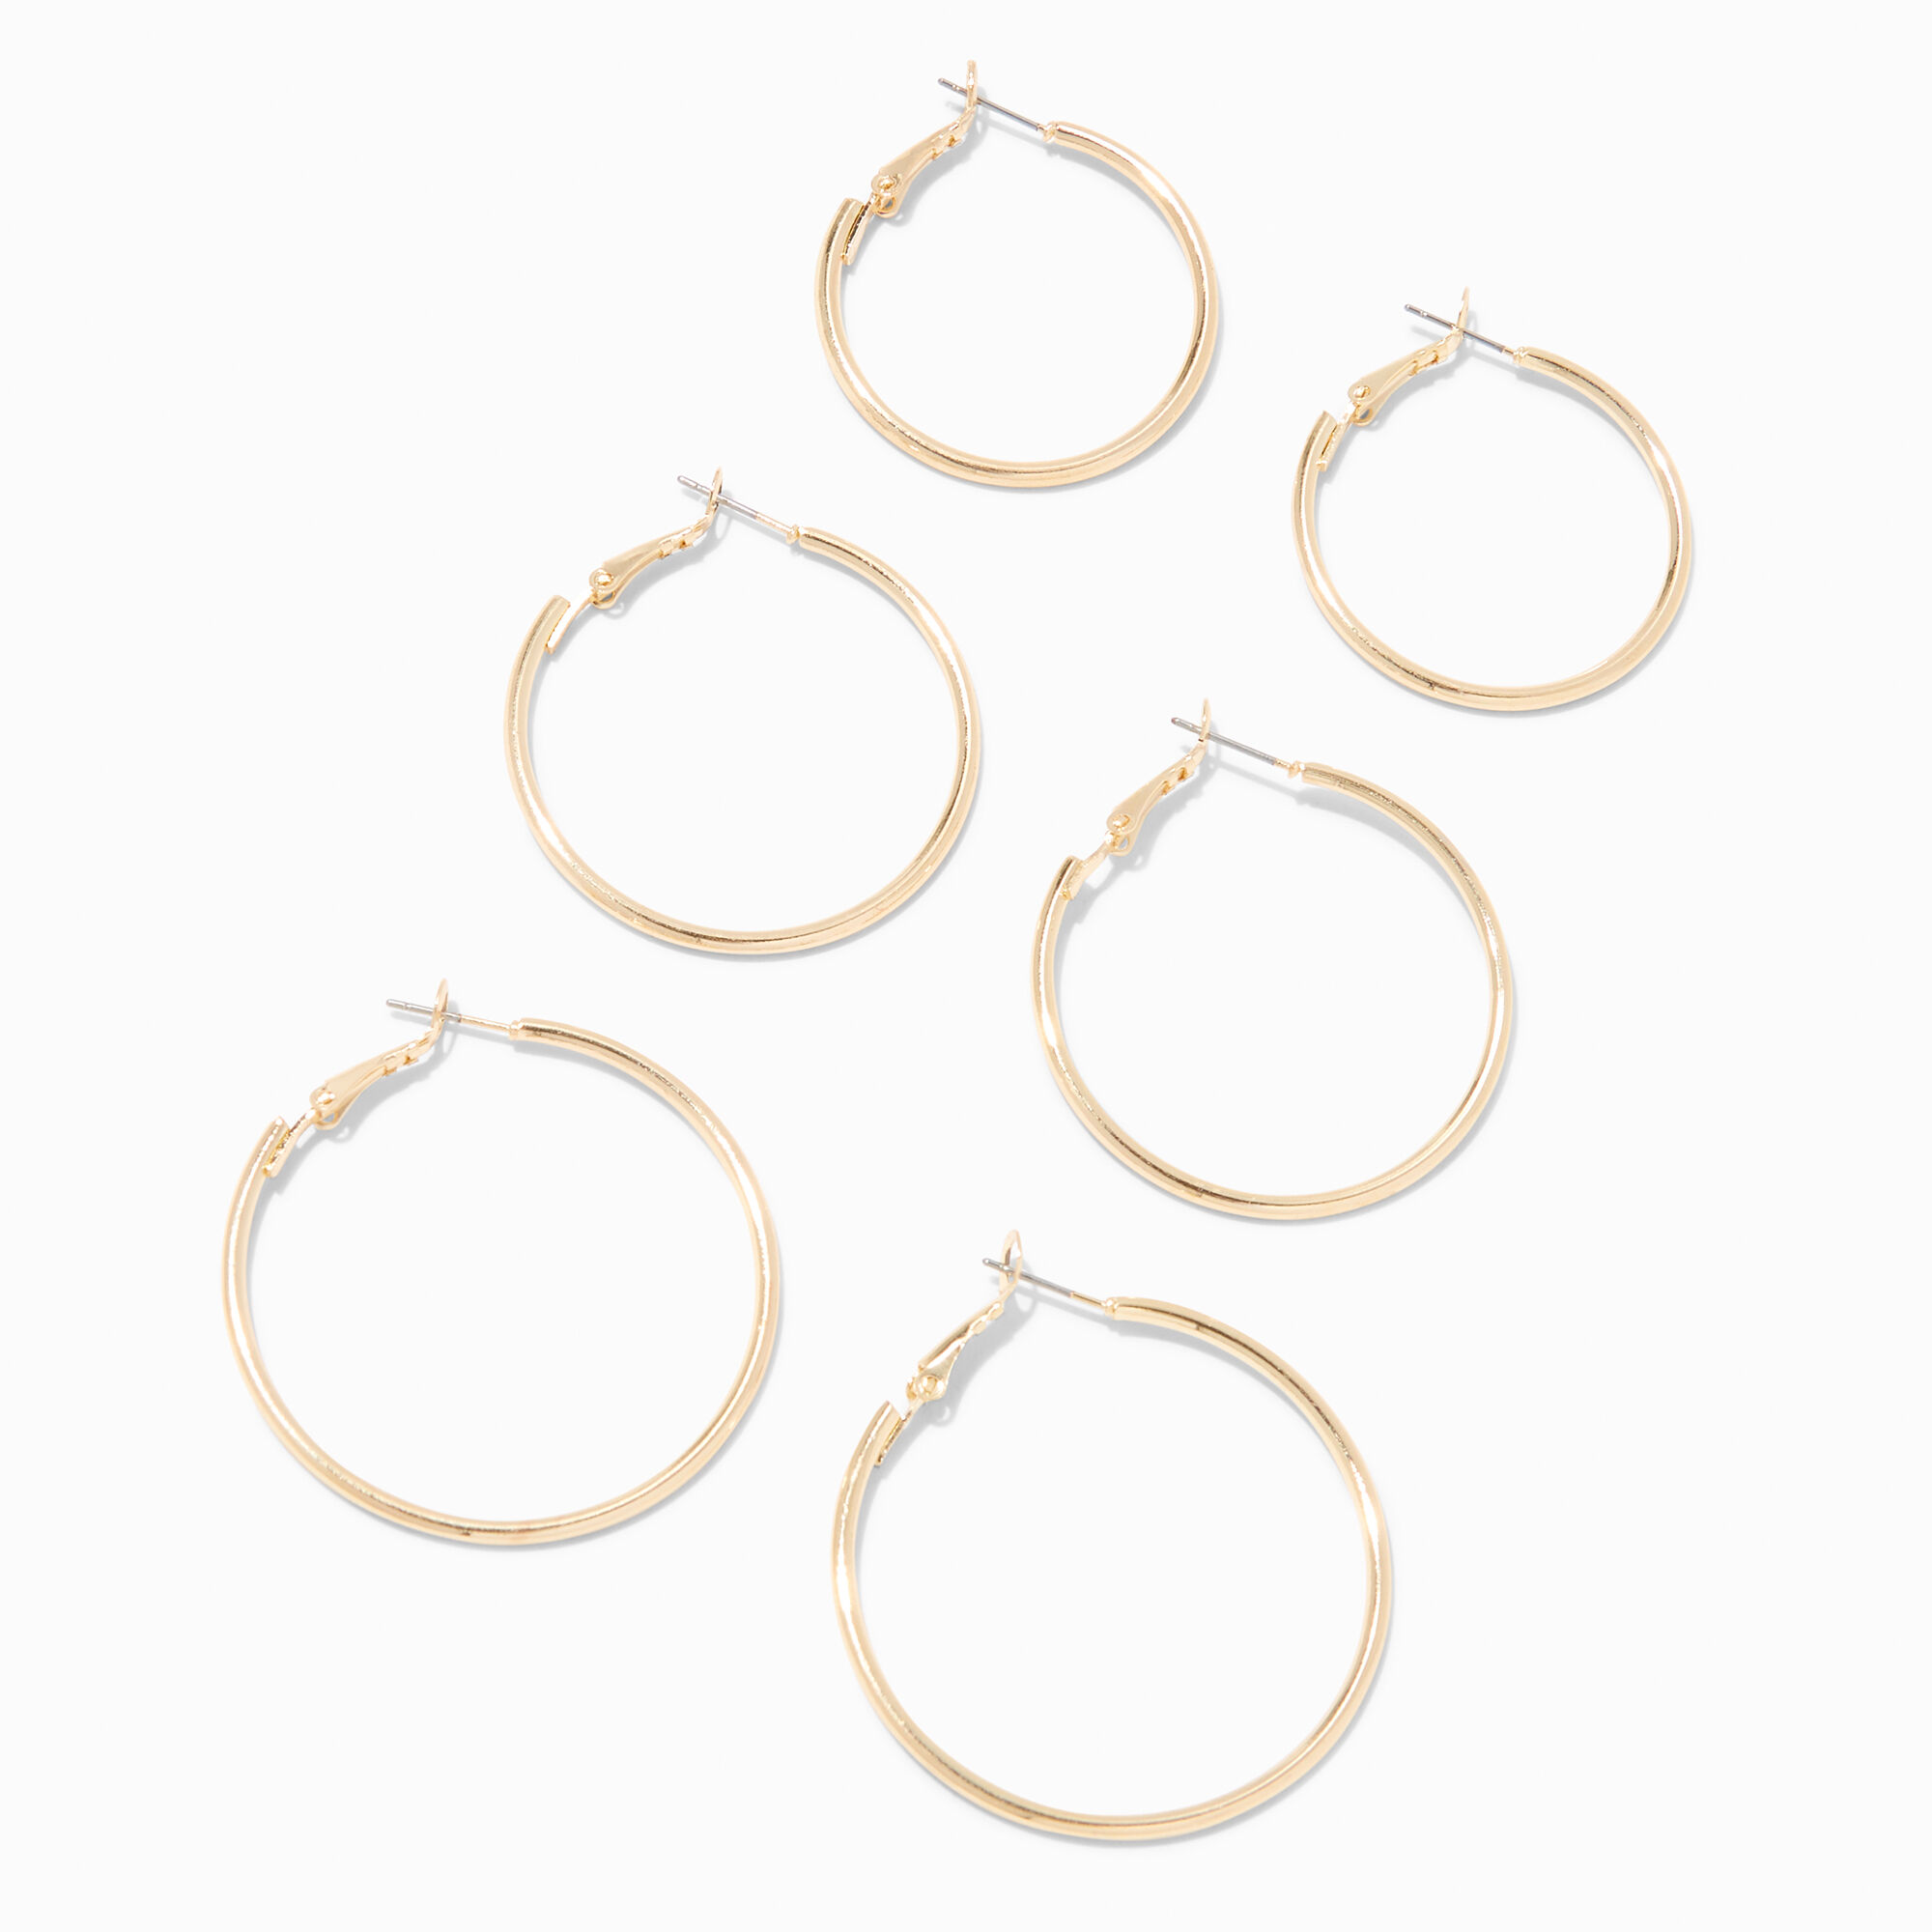 View Claires Tone Graduated Hinge Hoop Earrings 3 Pack Gold information